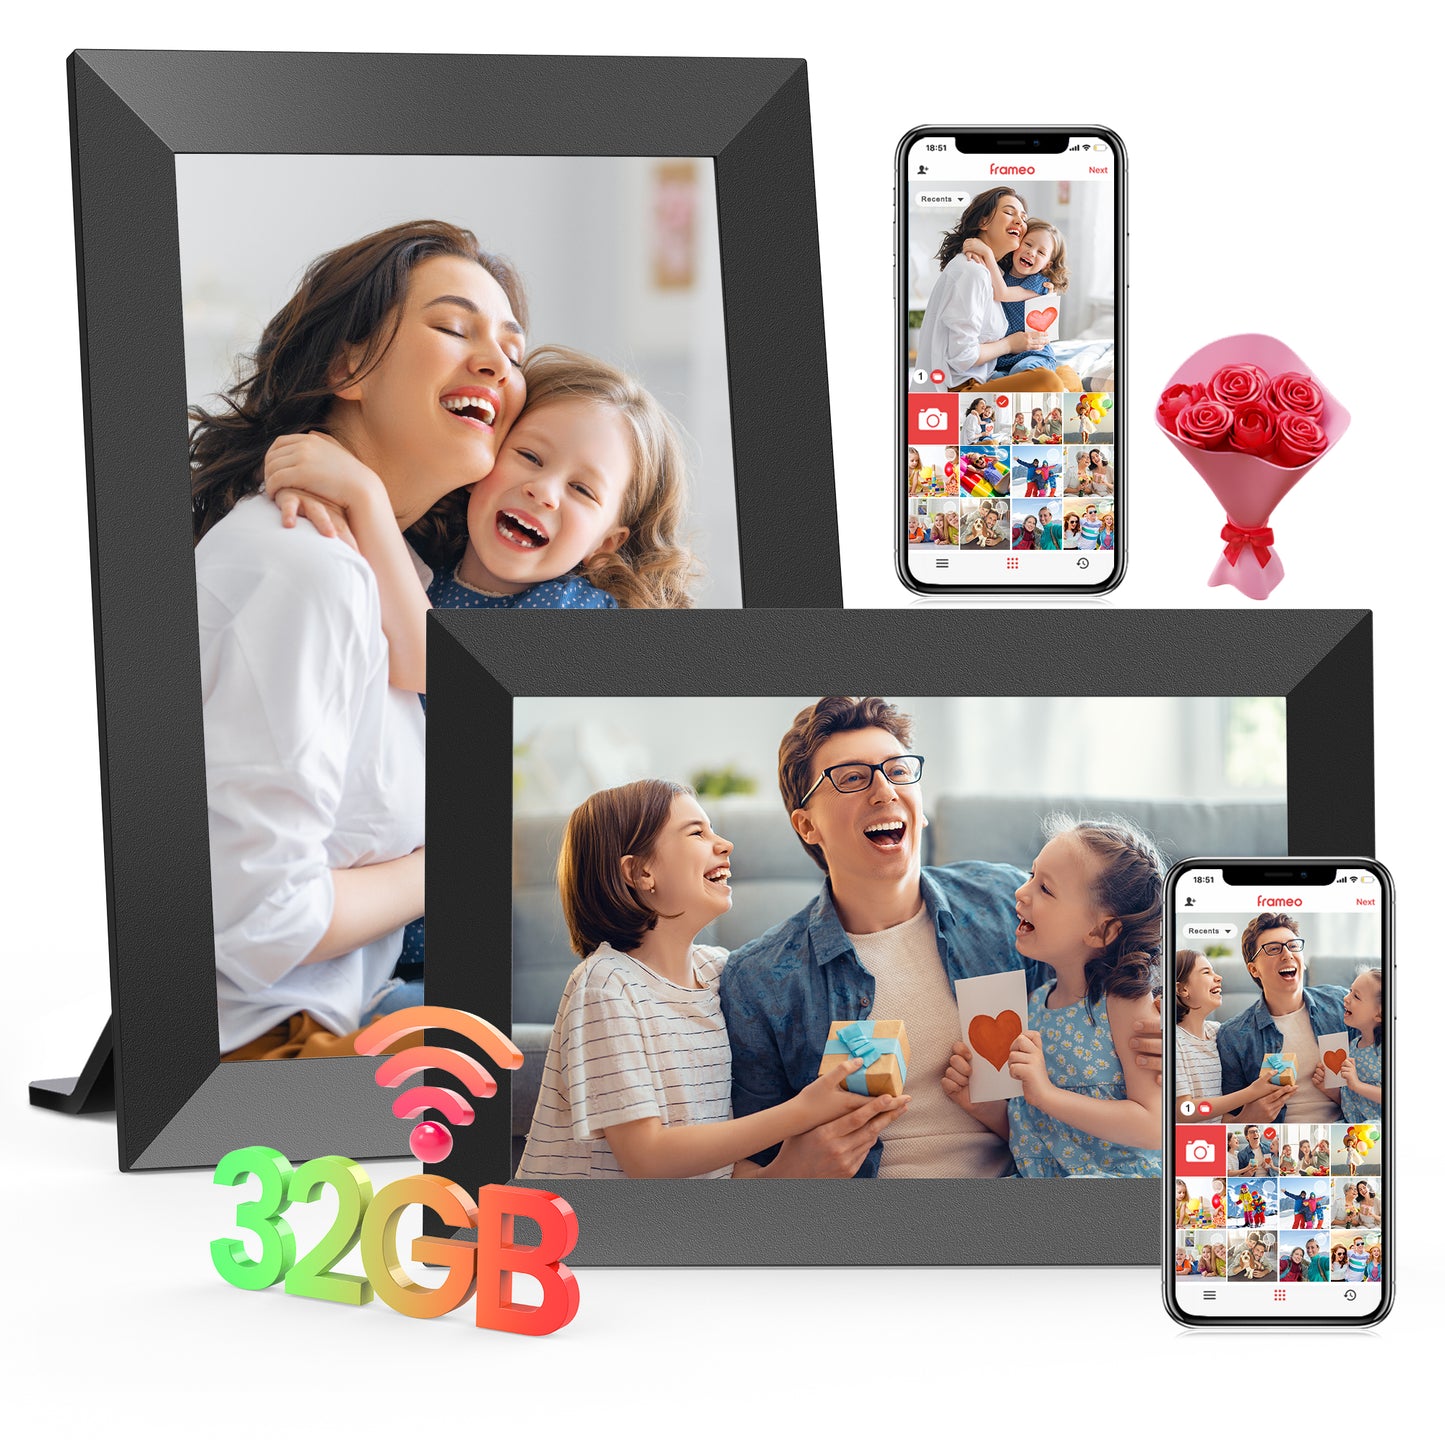 RICILAR Frameo WiFi Digital Picture Frames 2 Pack, 10.1-inch Electronic Photo Frames with IPS Touch Screen, 32GB Storage, Auto-Rotate, Wall Mountable, Ideal Gift Selection!